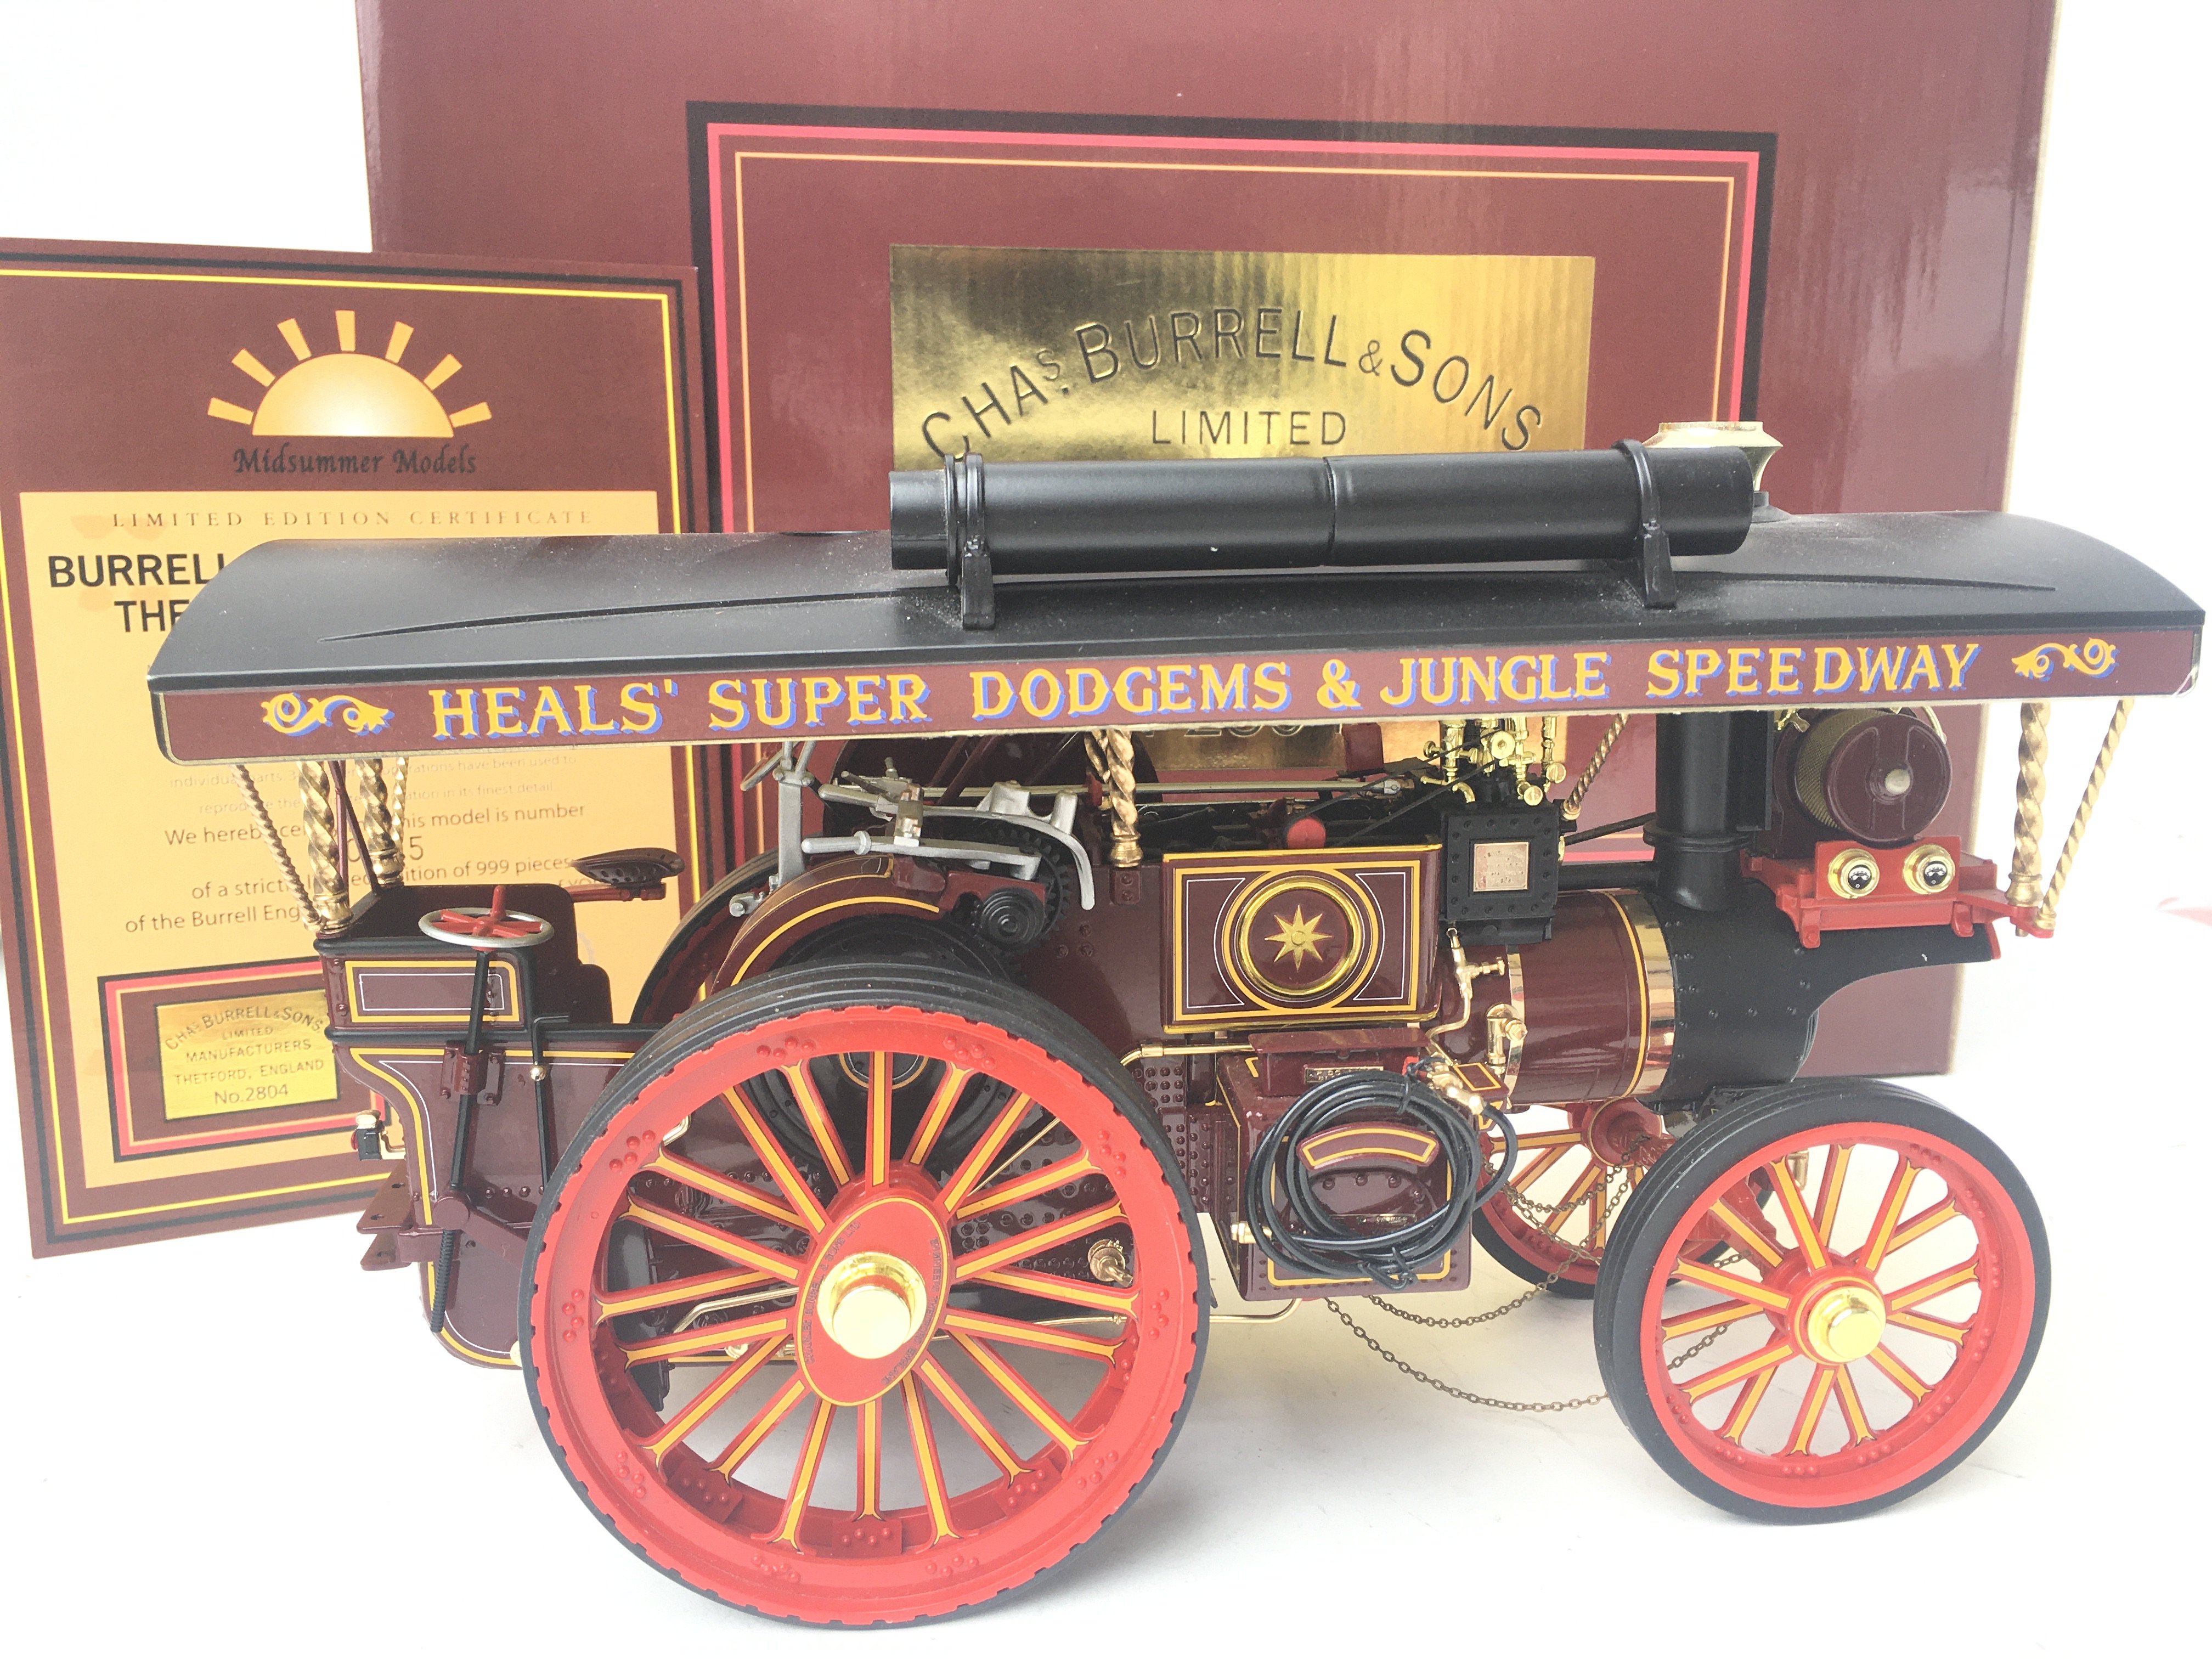 A Boxed Midsummer Models Burrell Showmanâ€™s Engin - Image 2 of 2